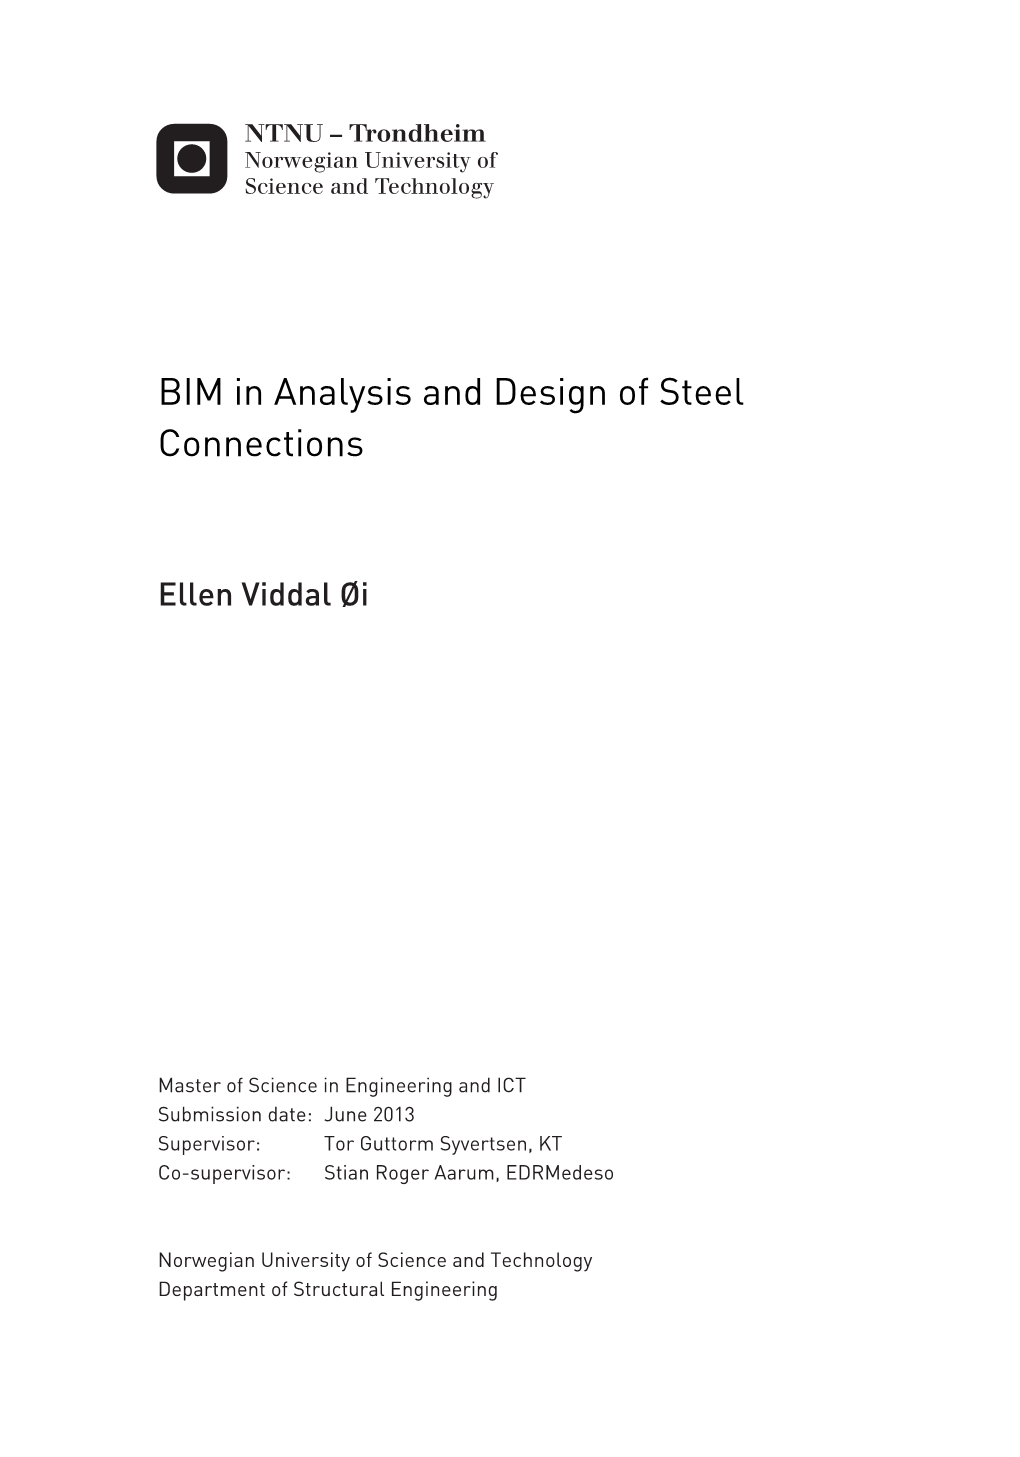 BIM in Analysis and Design of Steel Connections